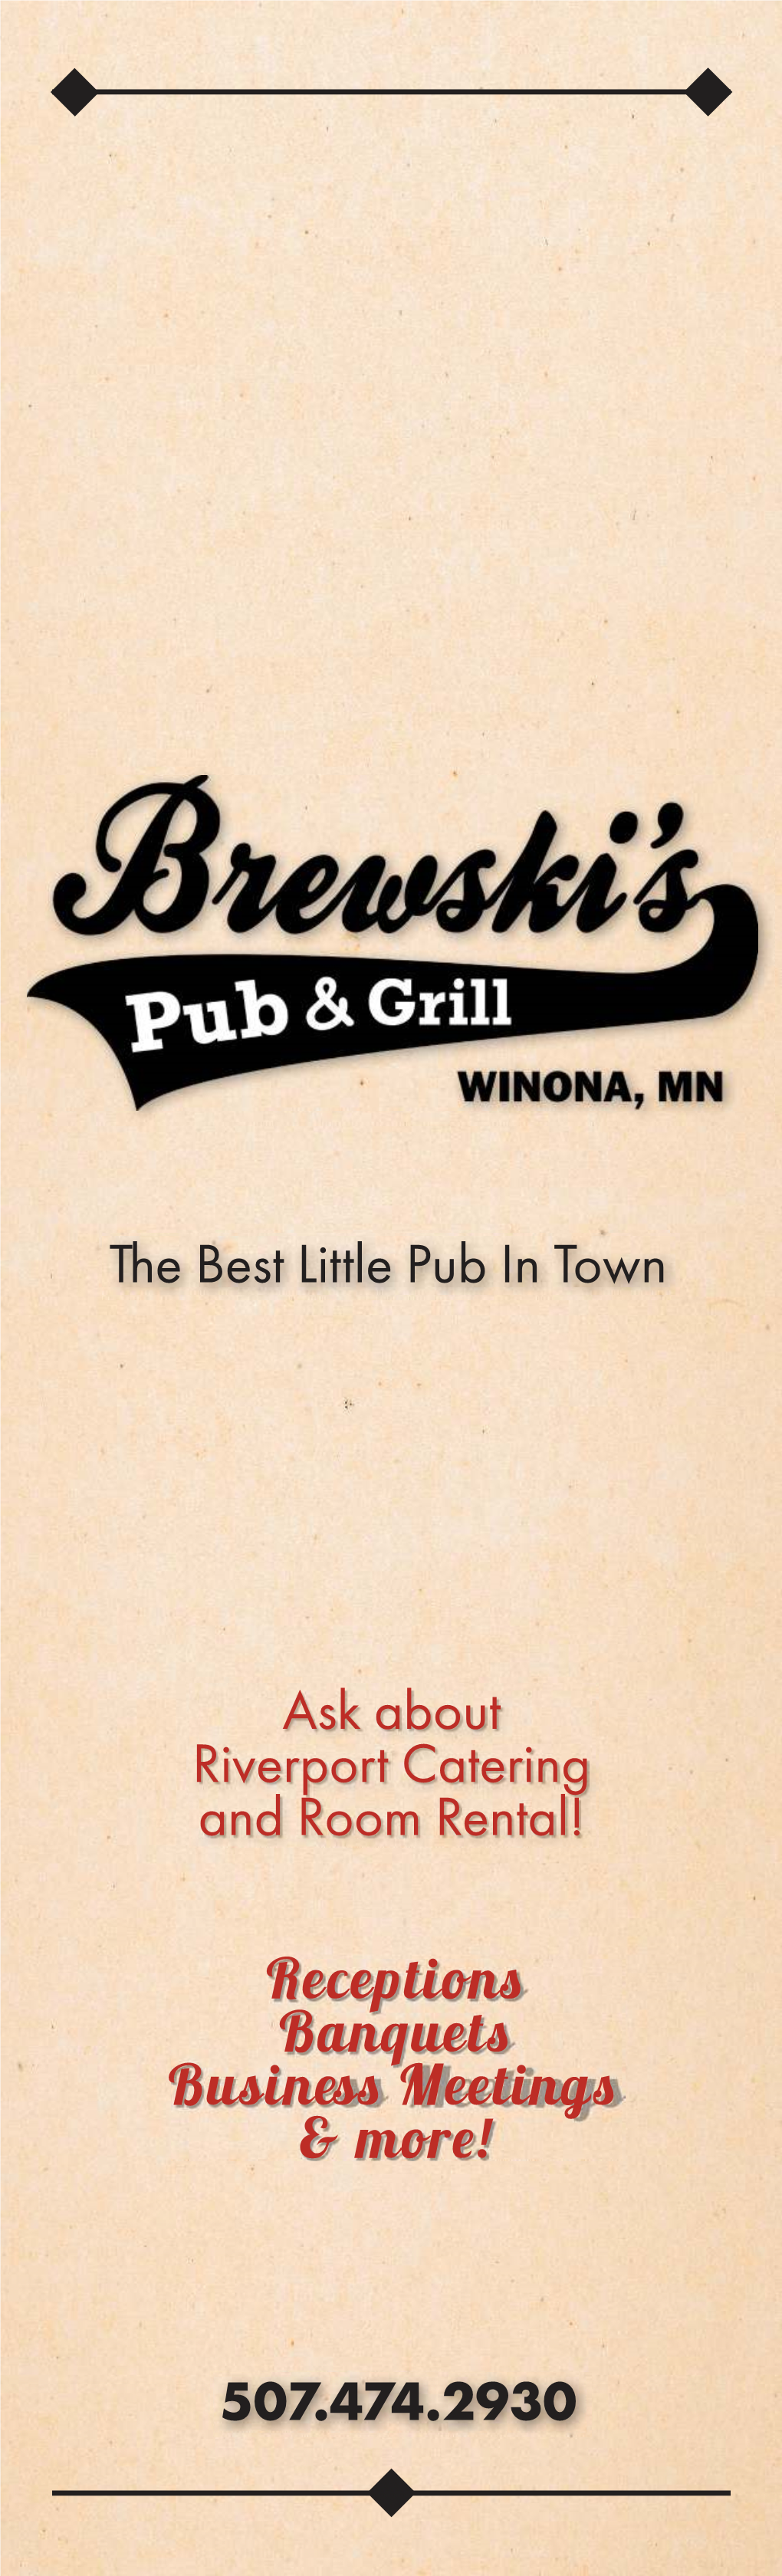 The Best Little Pub in Town 507.474.2930